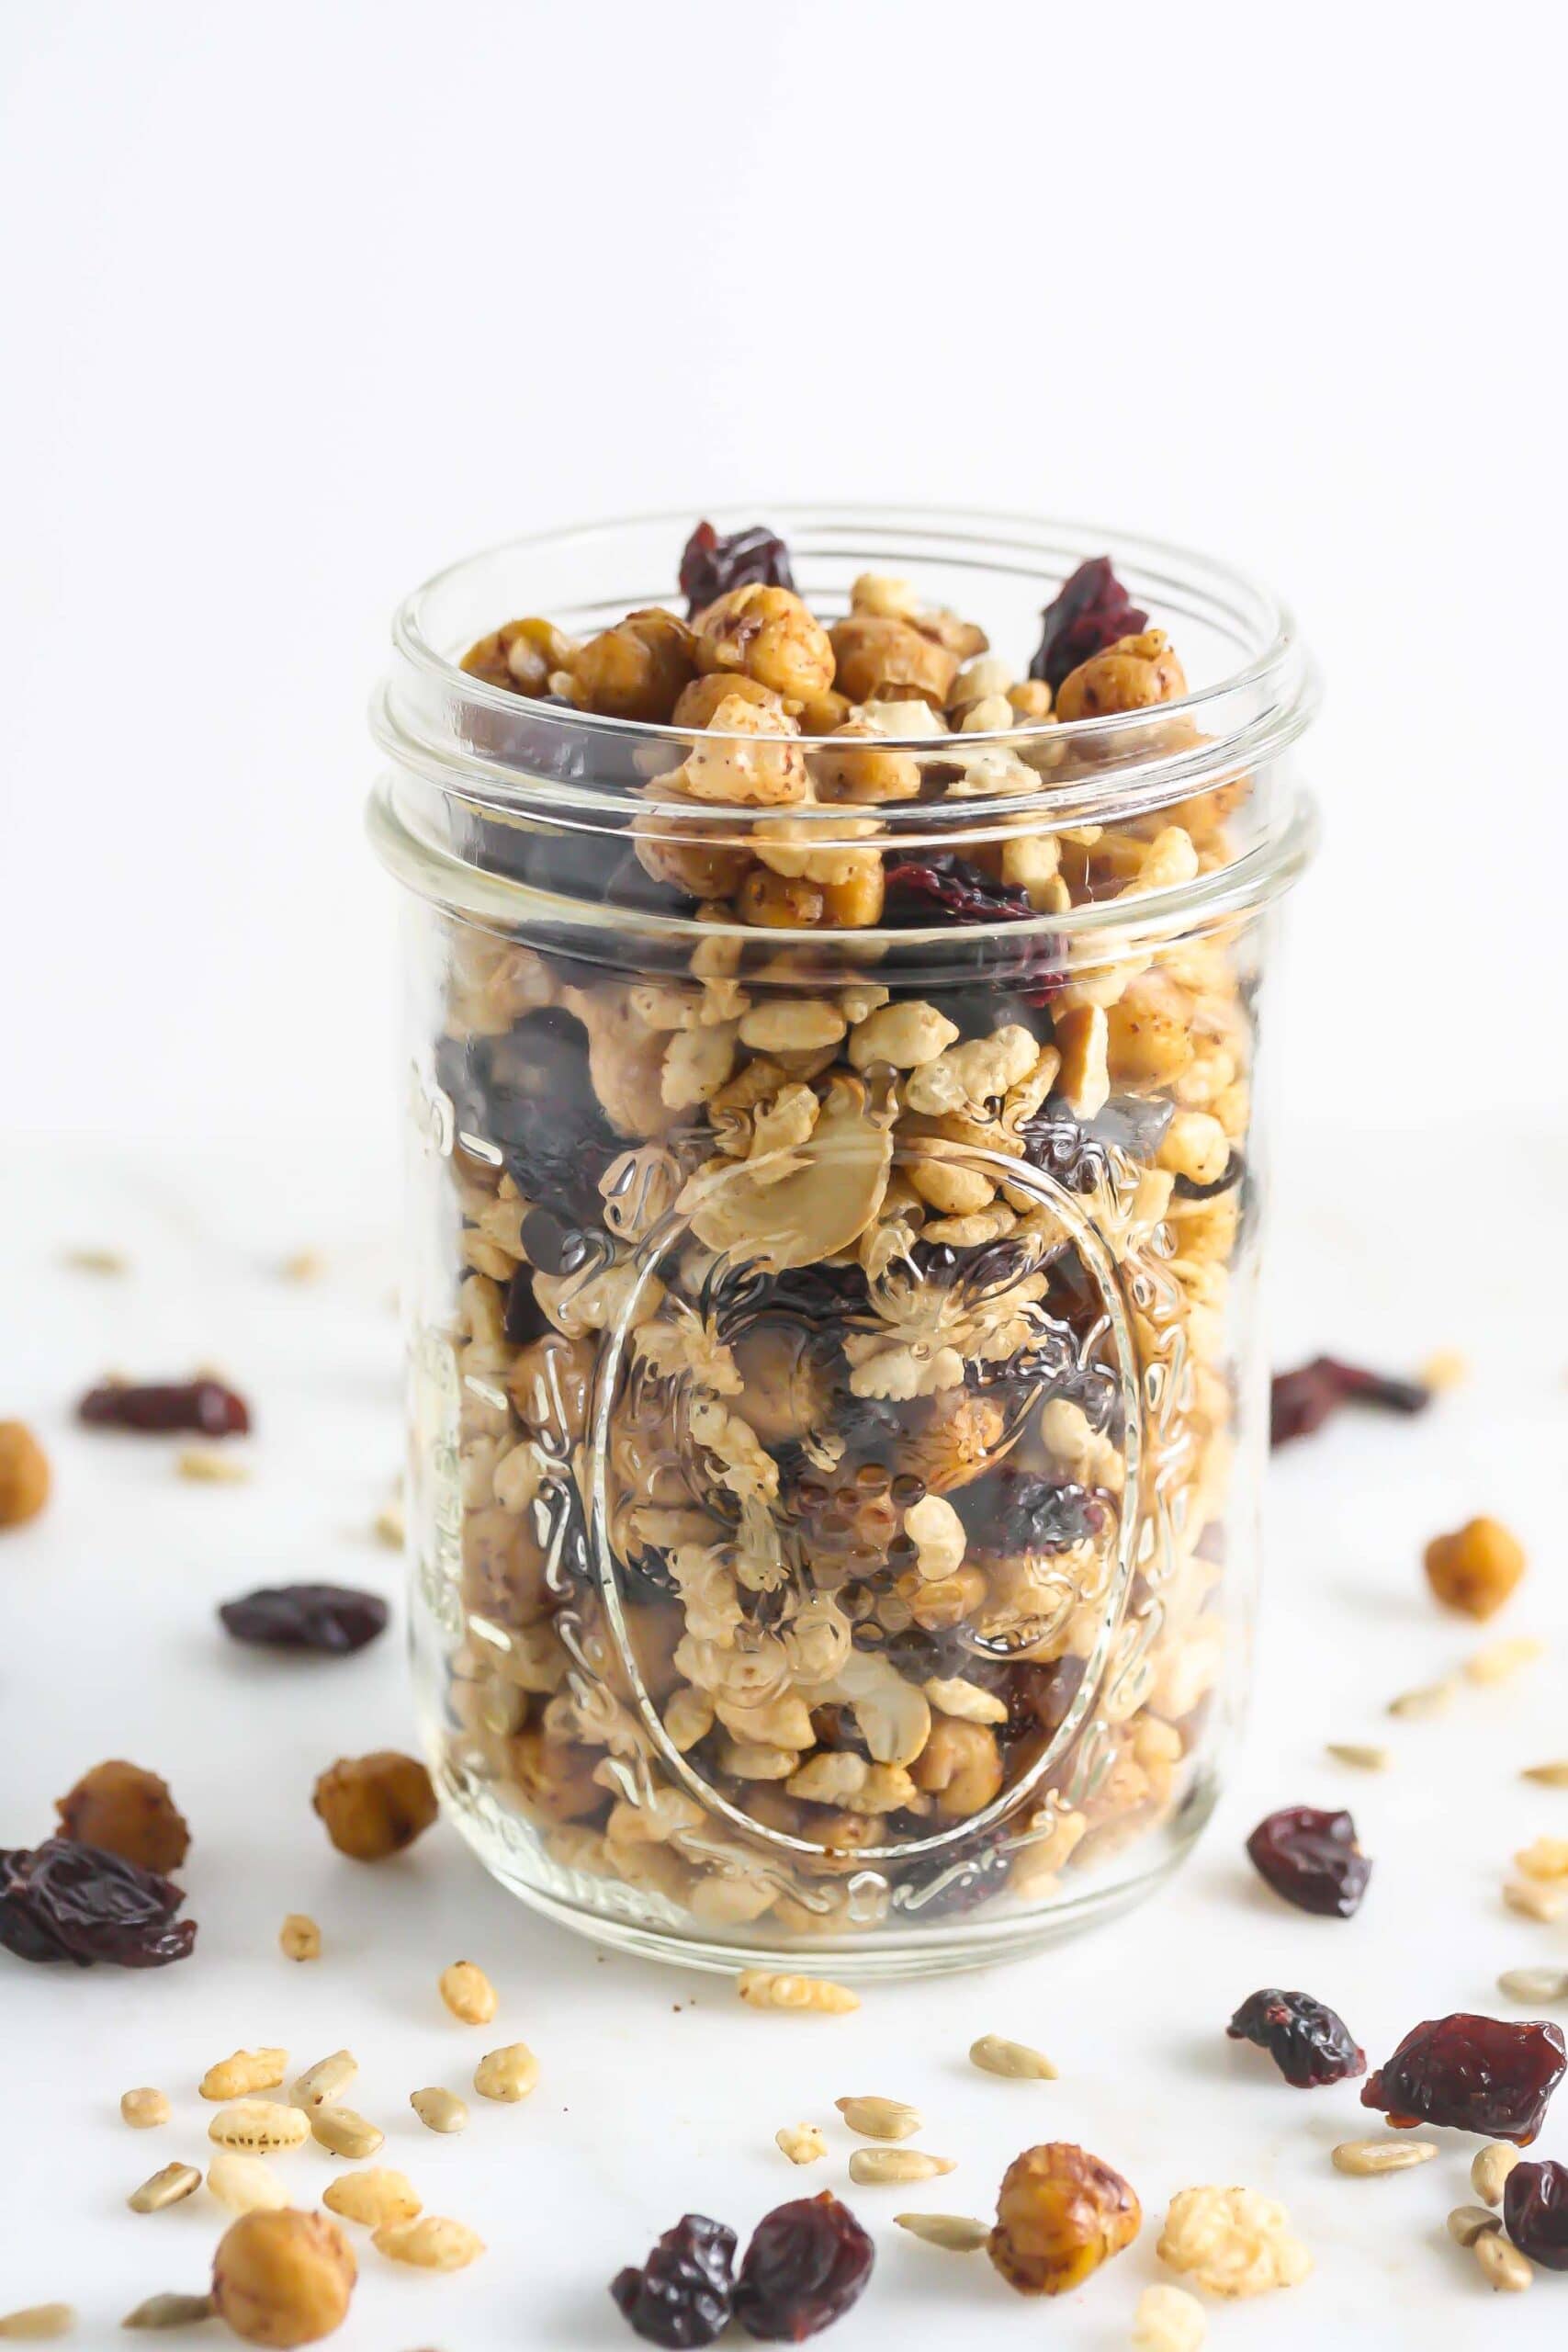 Roasted chickpea trail mix in a clear jar and some scattered around it.